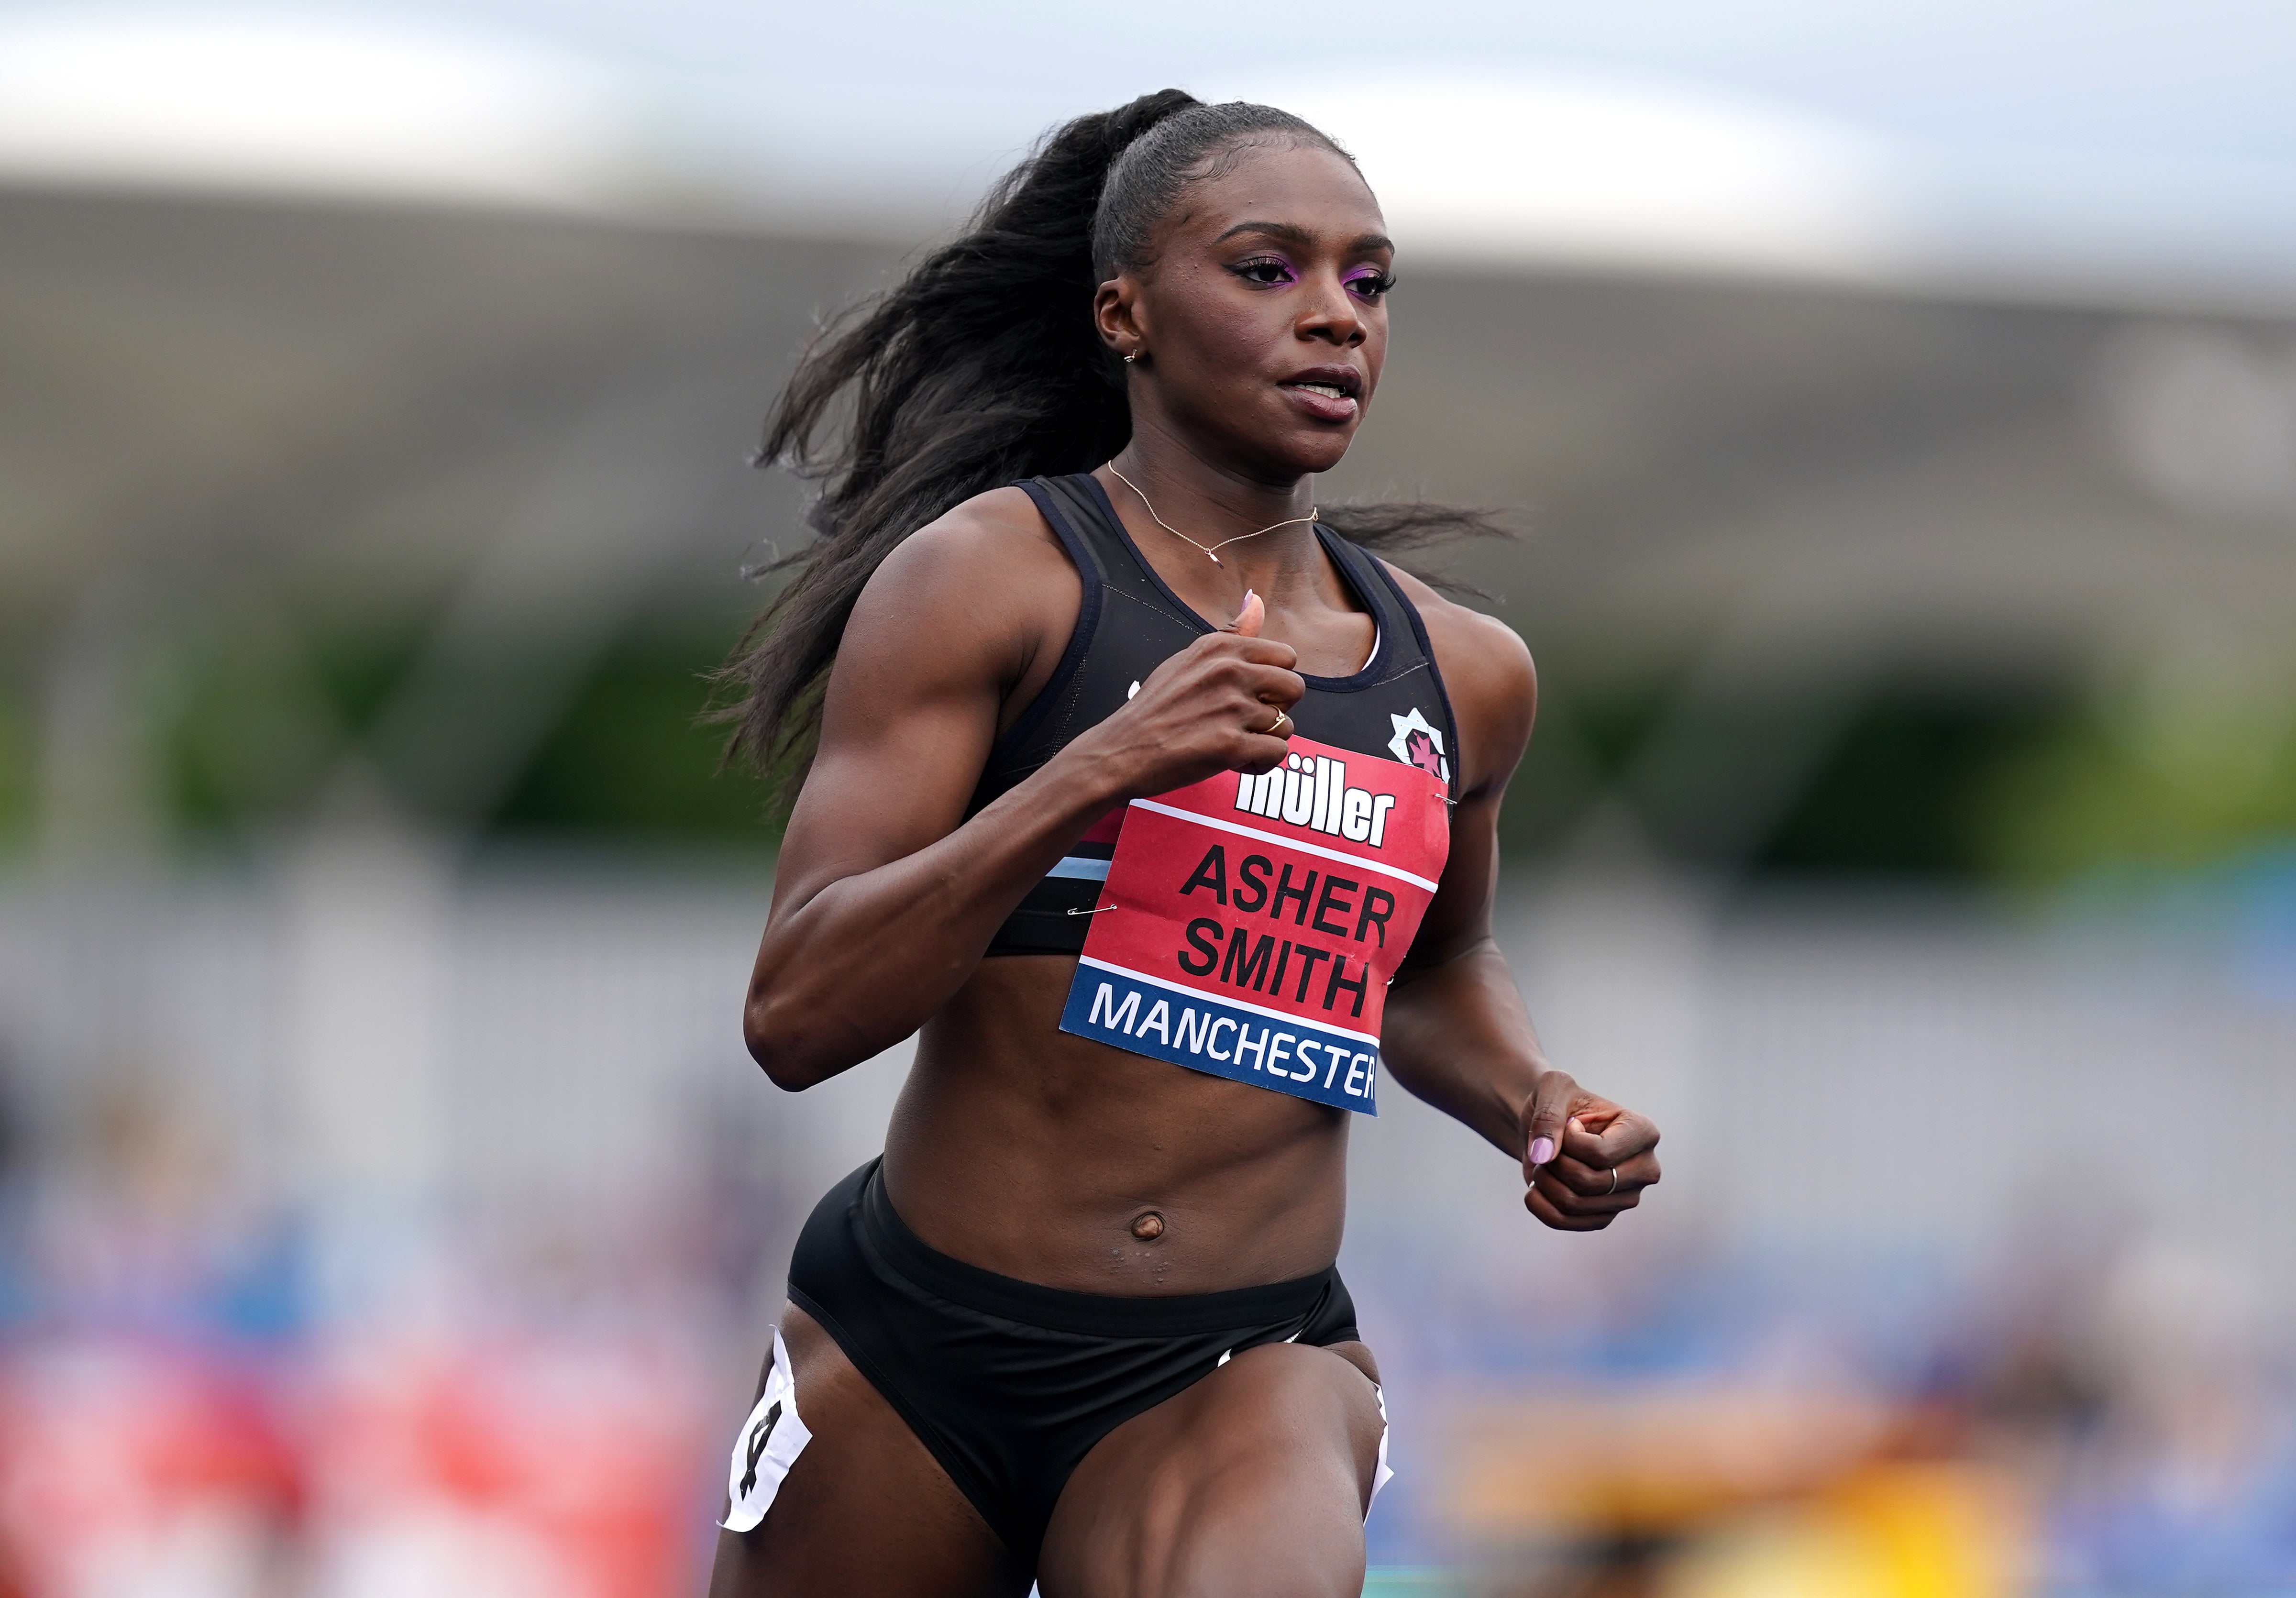 Dina Asher-Smith is a Team GB medal hope in the 100m and 200m.